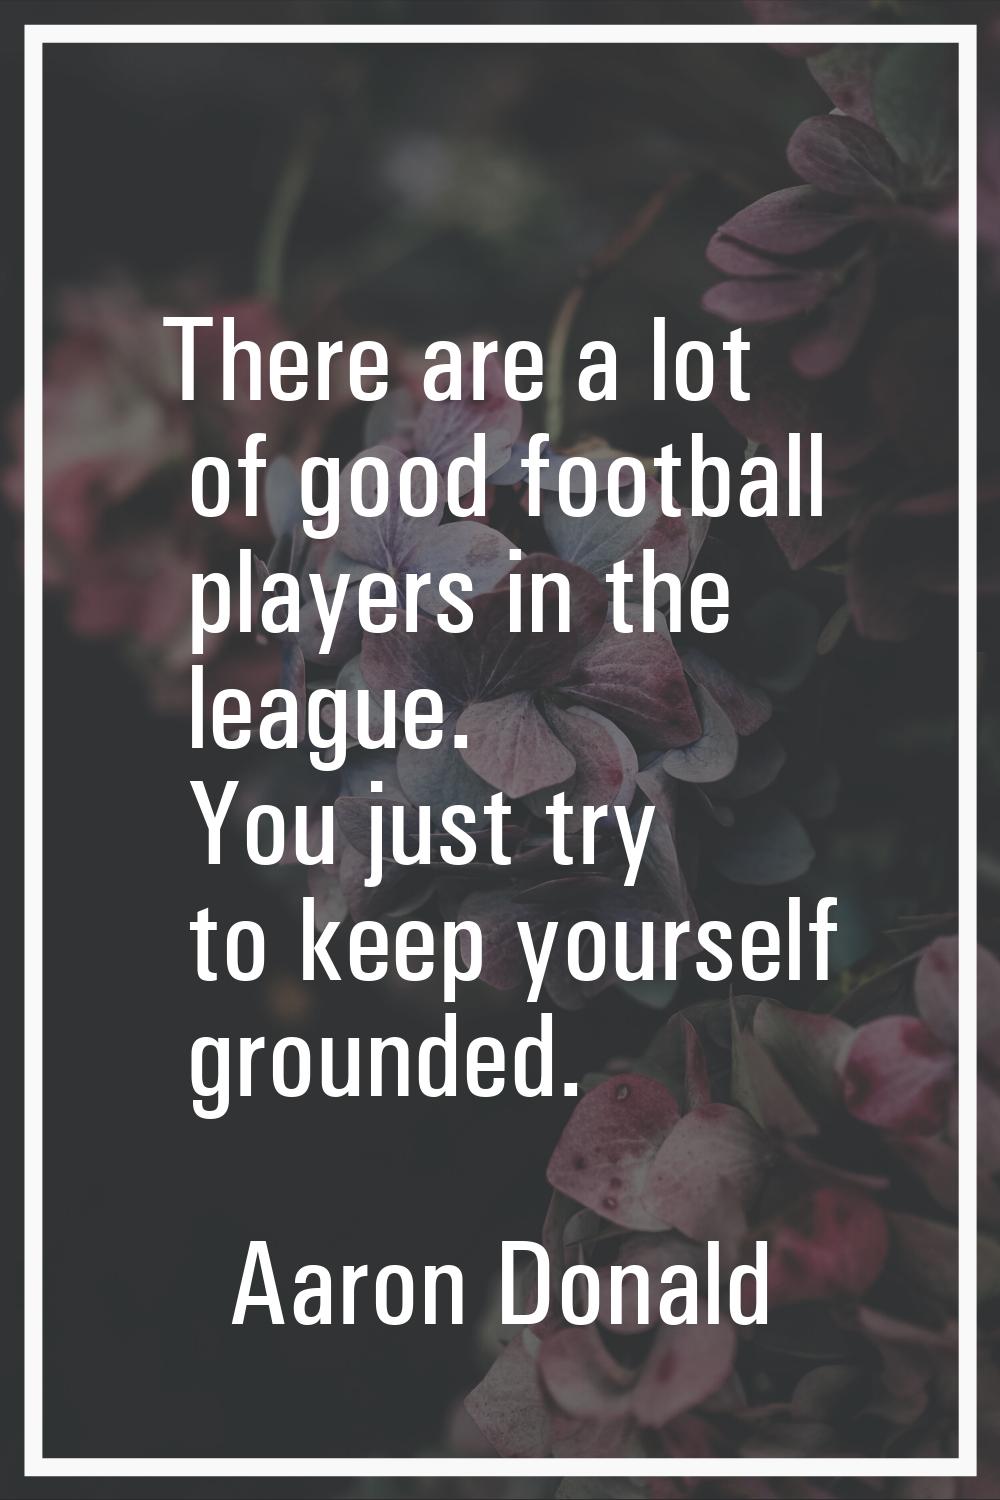 There are a lot of good football players in the league. You just try to keep yourself grounded.